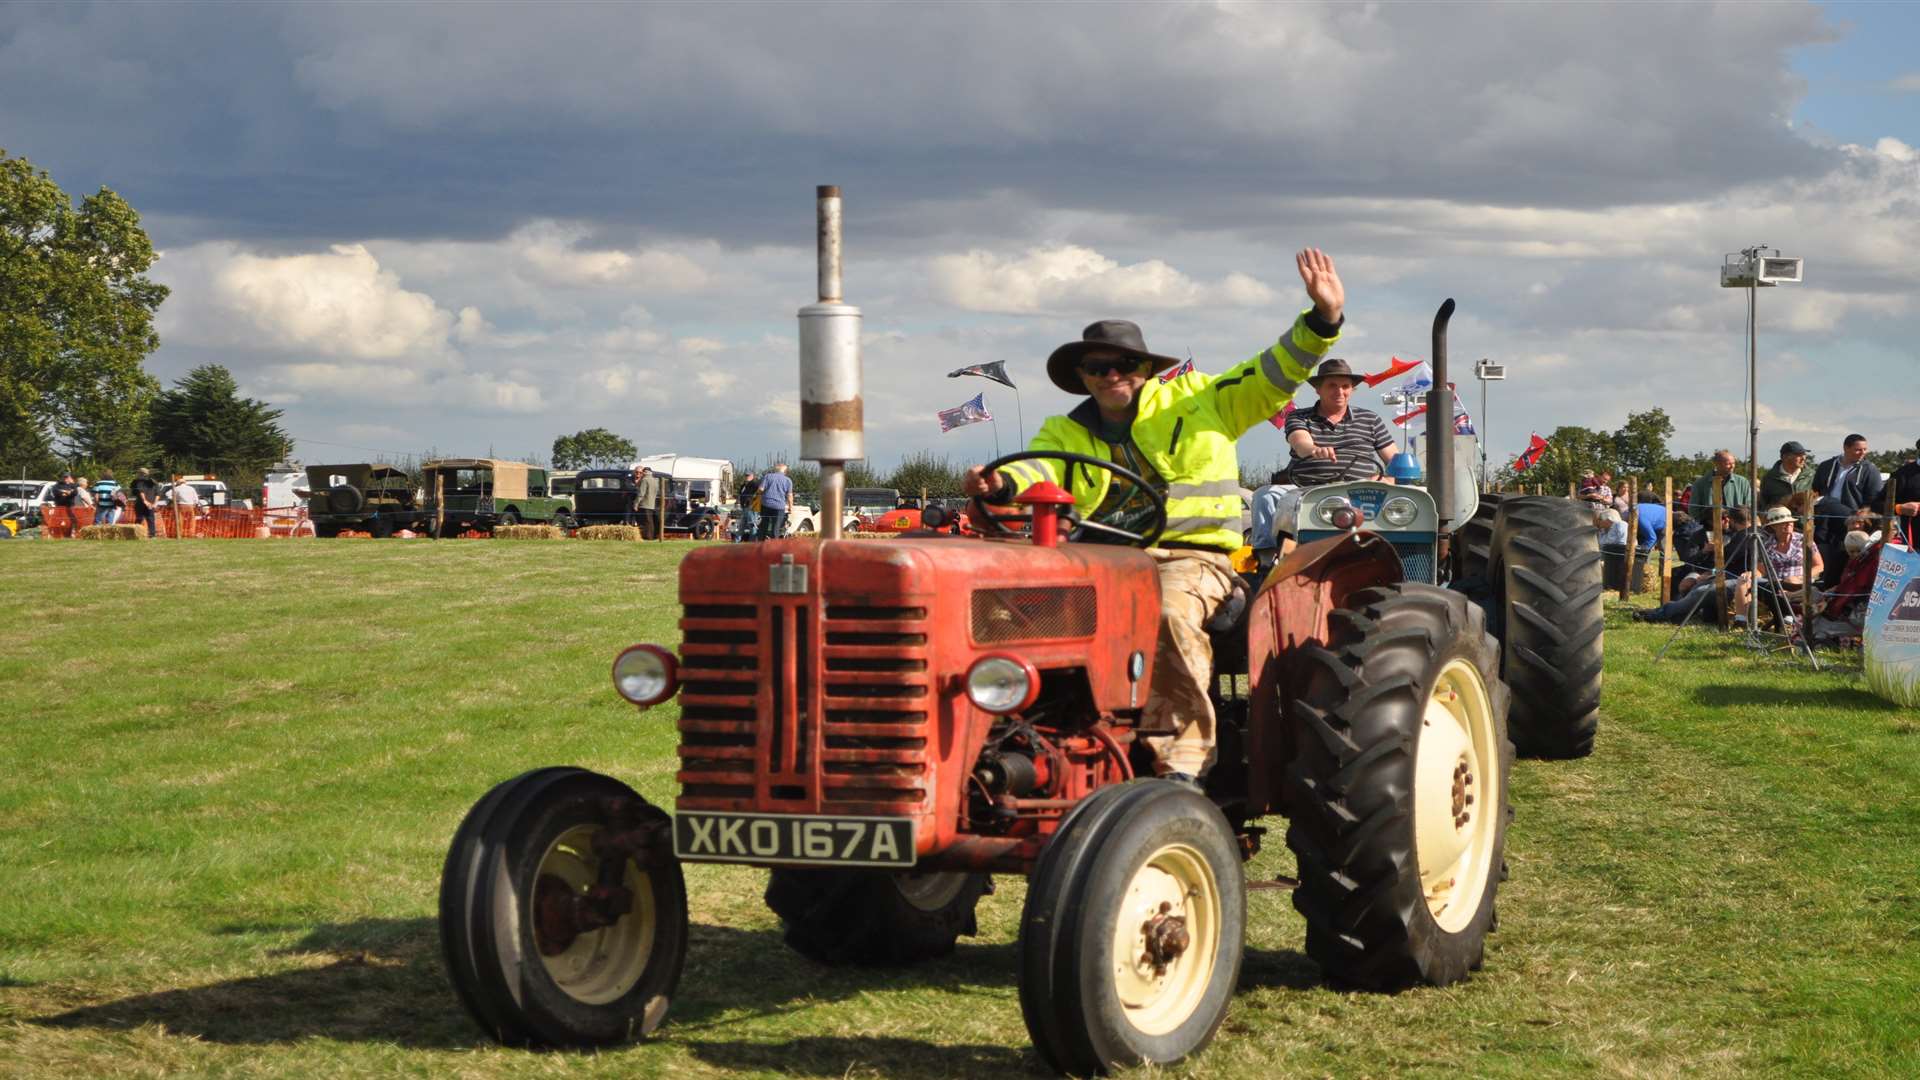 Tractorfest is set to roll into Biddenden. Picture: Nick Marshall